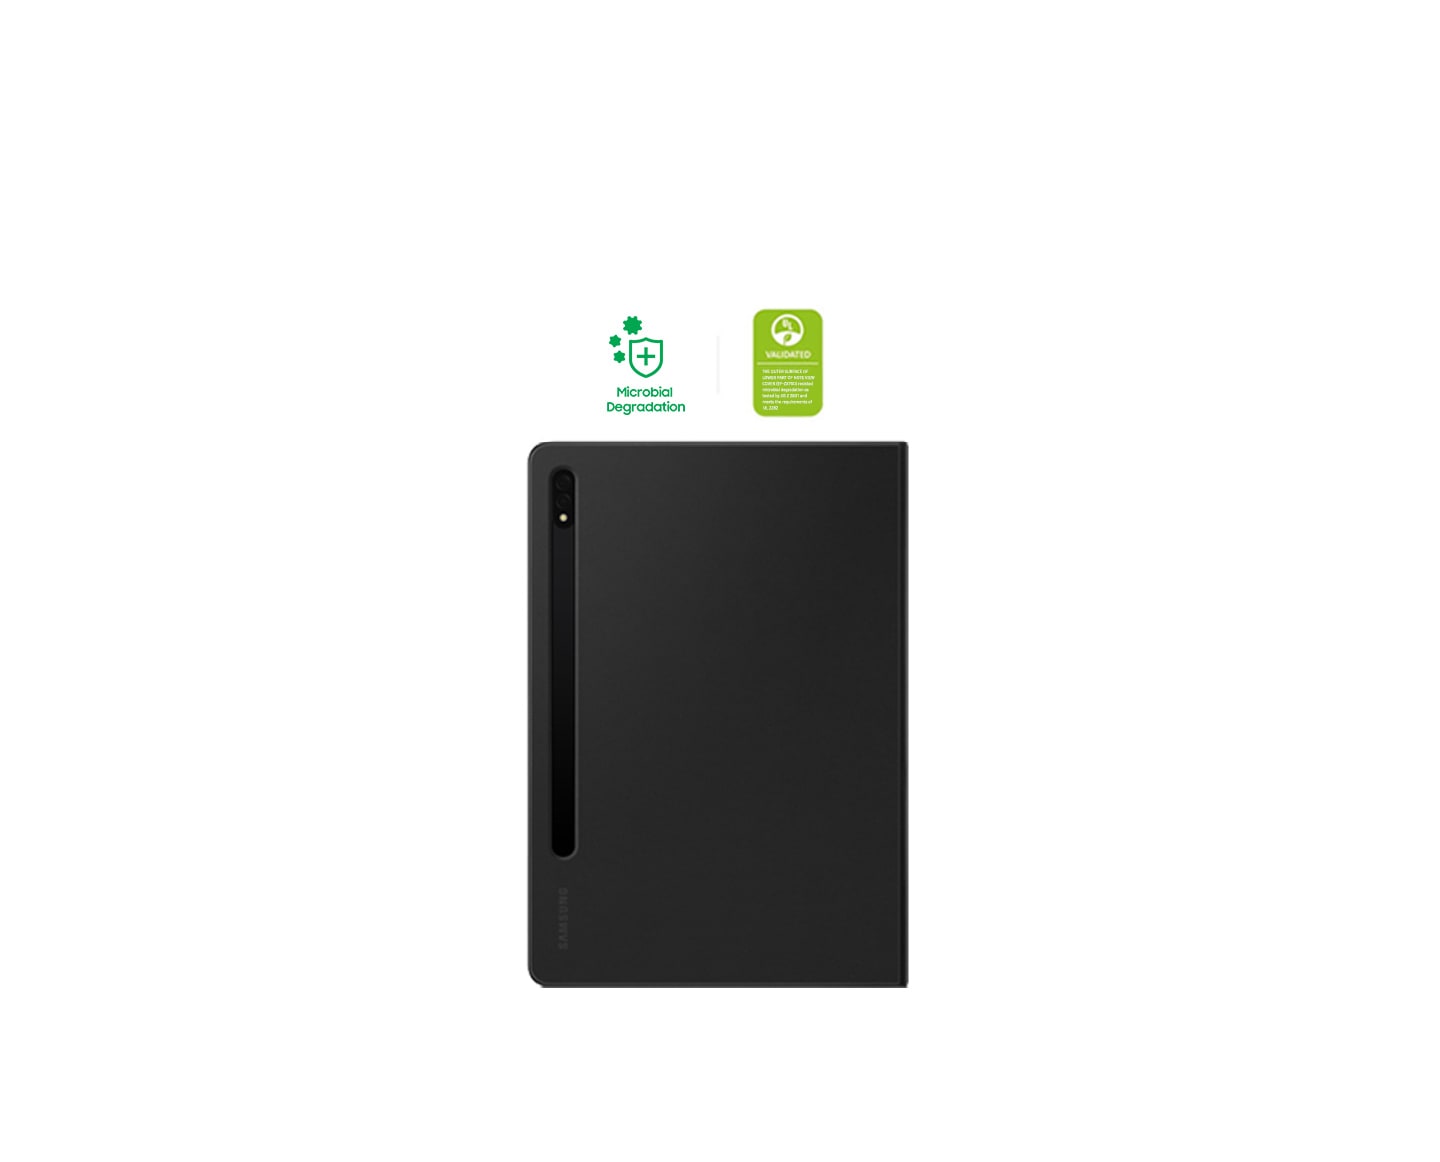 Tab S8 Note View Cover shown. Placed side by side on top are an icon representing †Antimicrobial Coating’ and the UL Environmental Claim Validation icon.